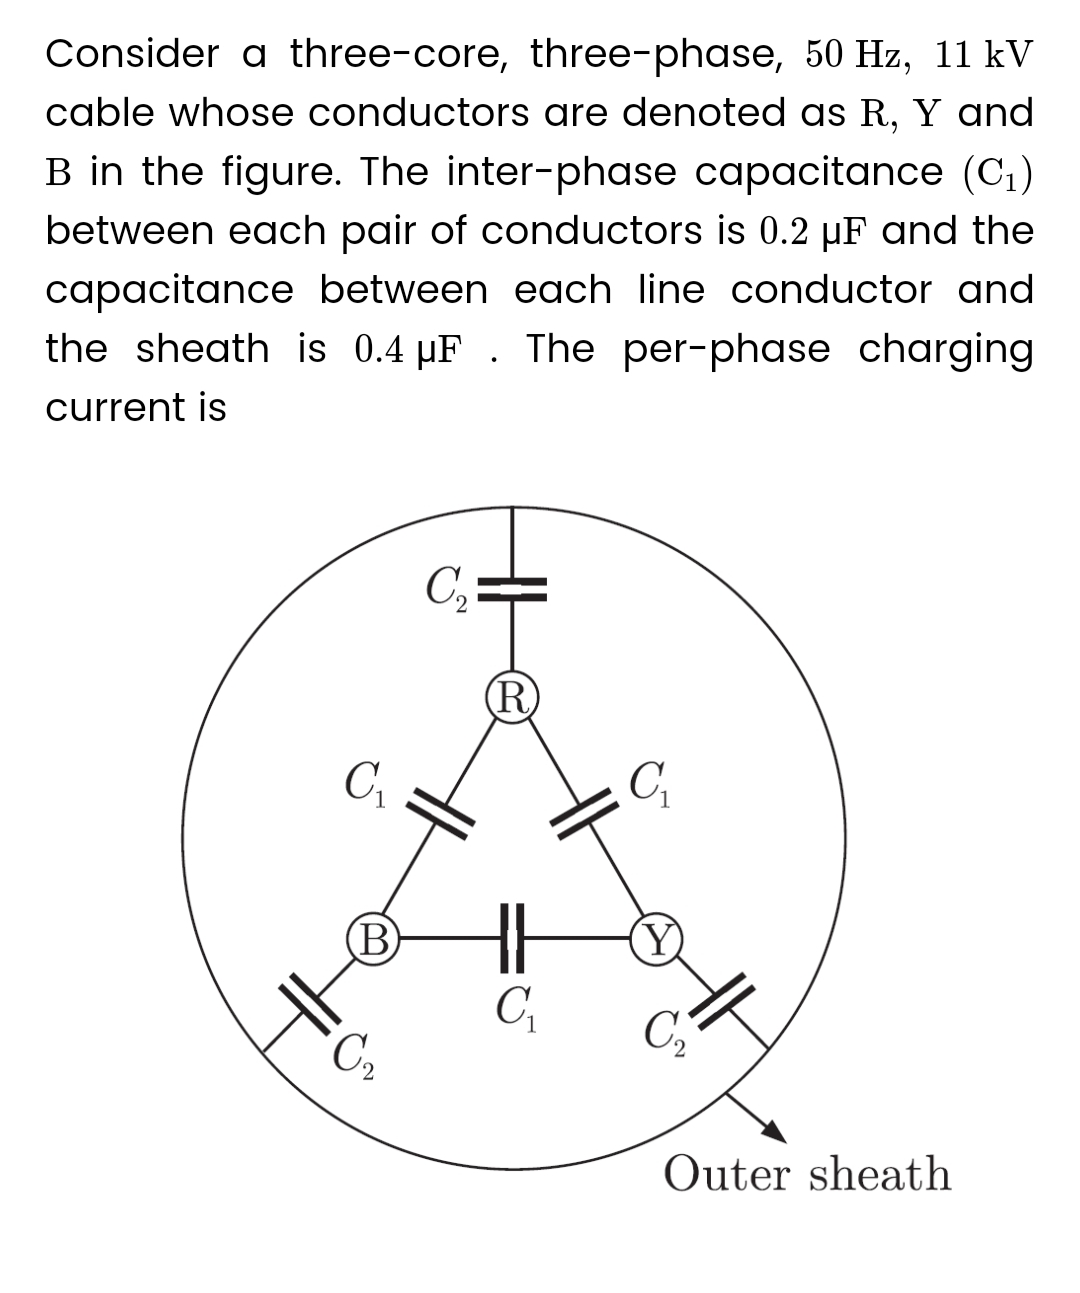 50 Hz, 11 kV
Consider a three-core, three-phase,
cable whose conductors are denoted as R, Y and
B in the figure. The inter-phase capacitance (C₁)
between each pair of conductors is 0.2 µF and the
capacitance between each line conductor and
the sheath is 0.4 μF. The per-phase charging
current is
C₁
(B)
C₂
C₂:
(R
HH
C₁₂
C₁
C₂
Outer sheath